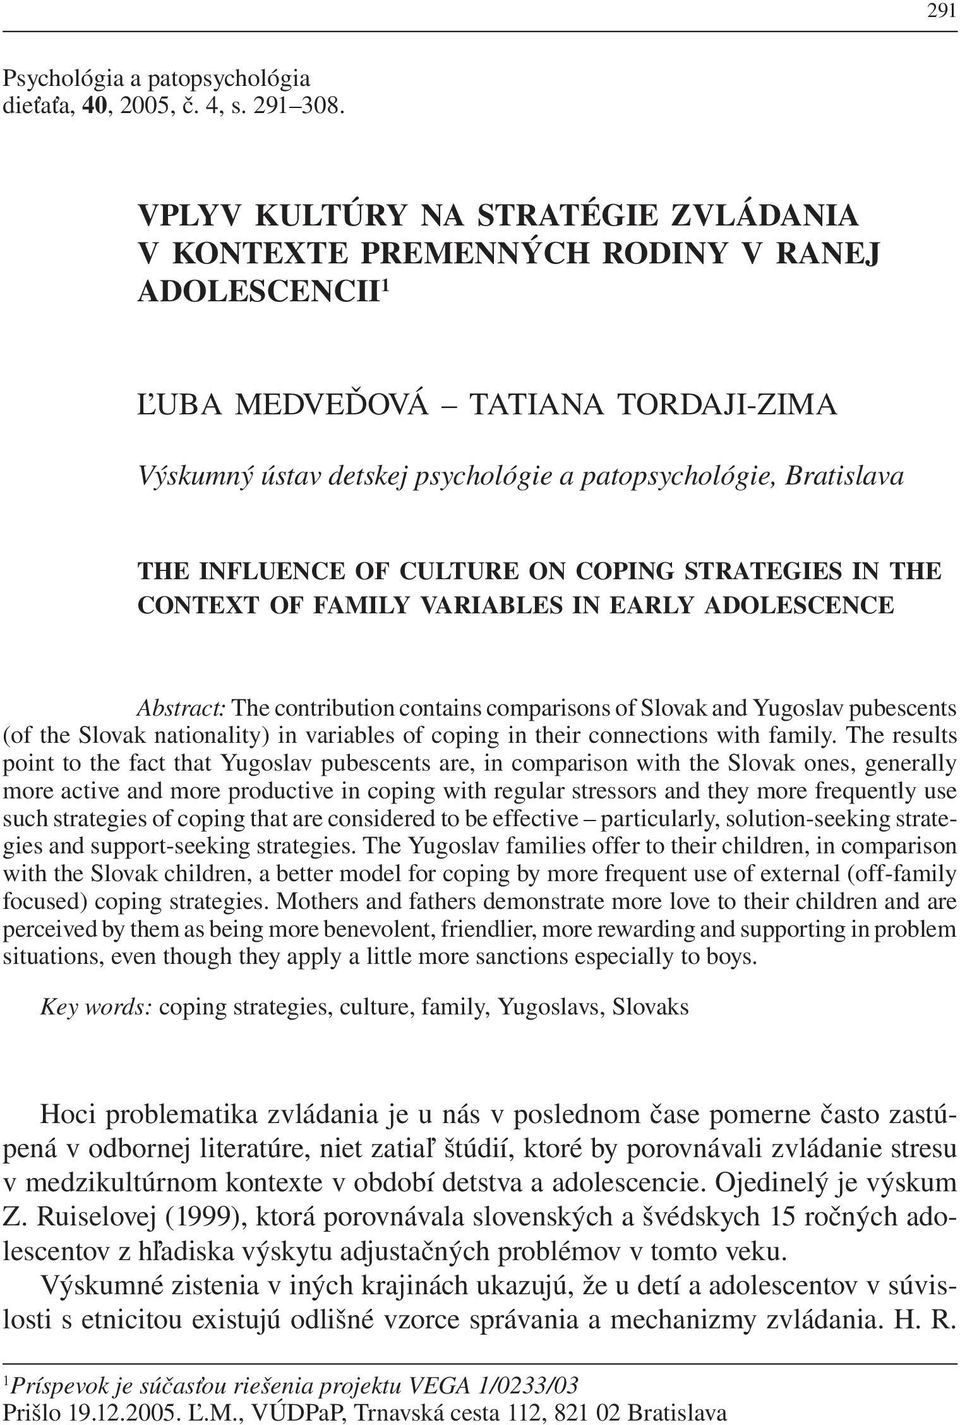 INFLUENCE OF CULTURE ON COPING STRATEGIES IN THE CONTEXT OF FAMILY VARIABLES IN EARLY ADOLESCENCE Abstract: The contribution contains comparisons of Slovak and Yugoslav pubescents (of the Slovak